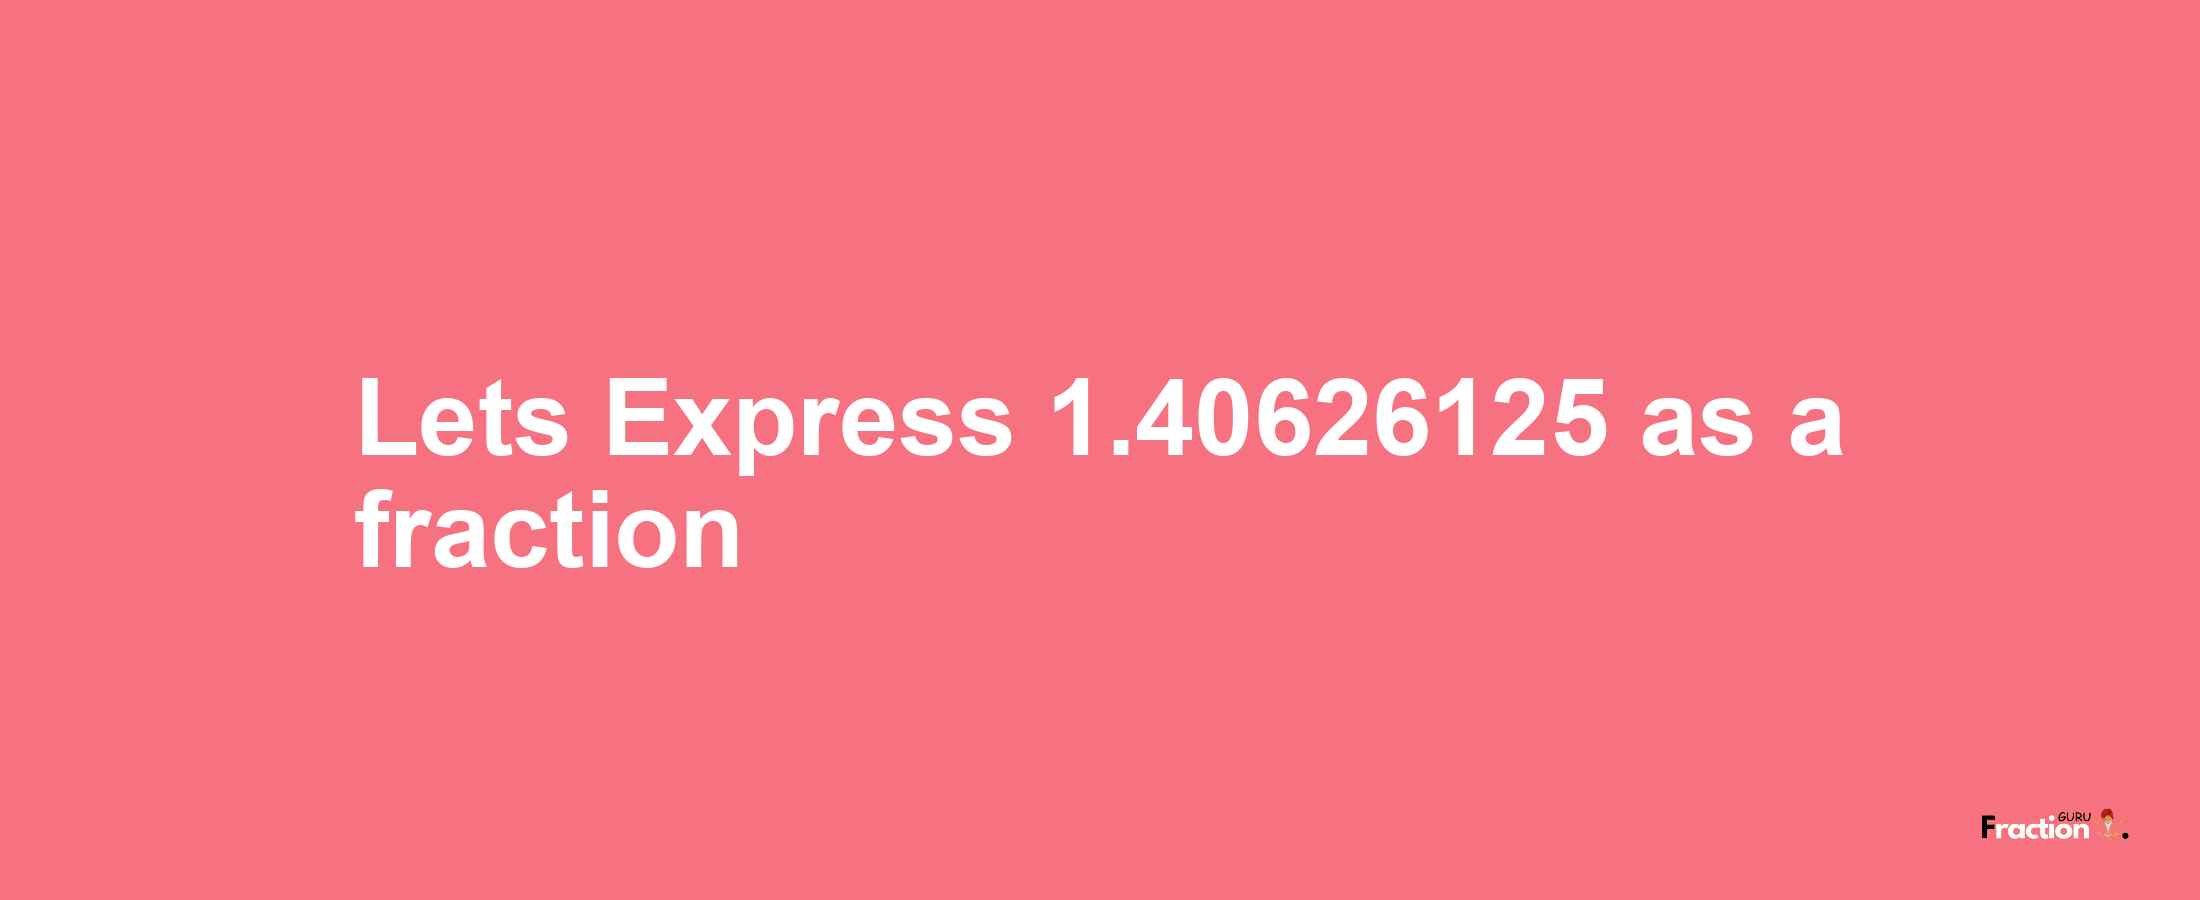 Lets Express 1.40626125 as afraction